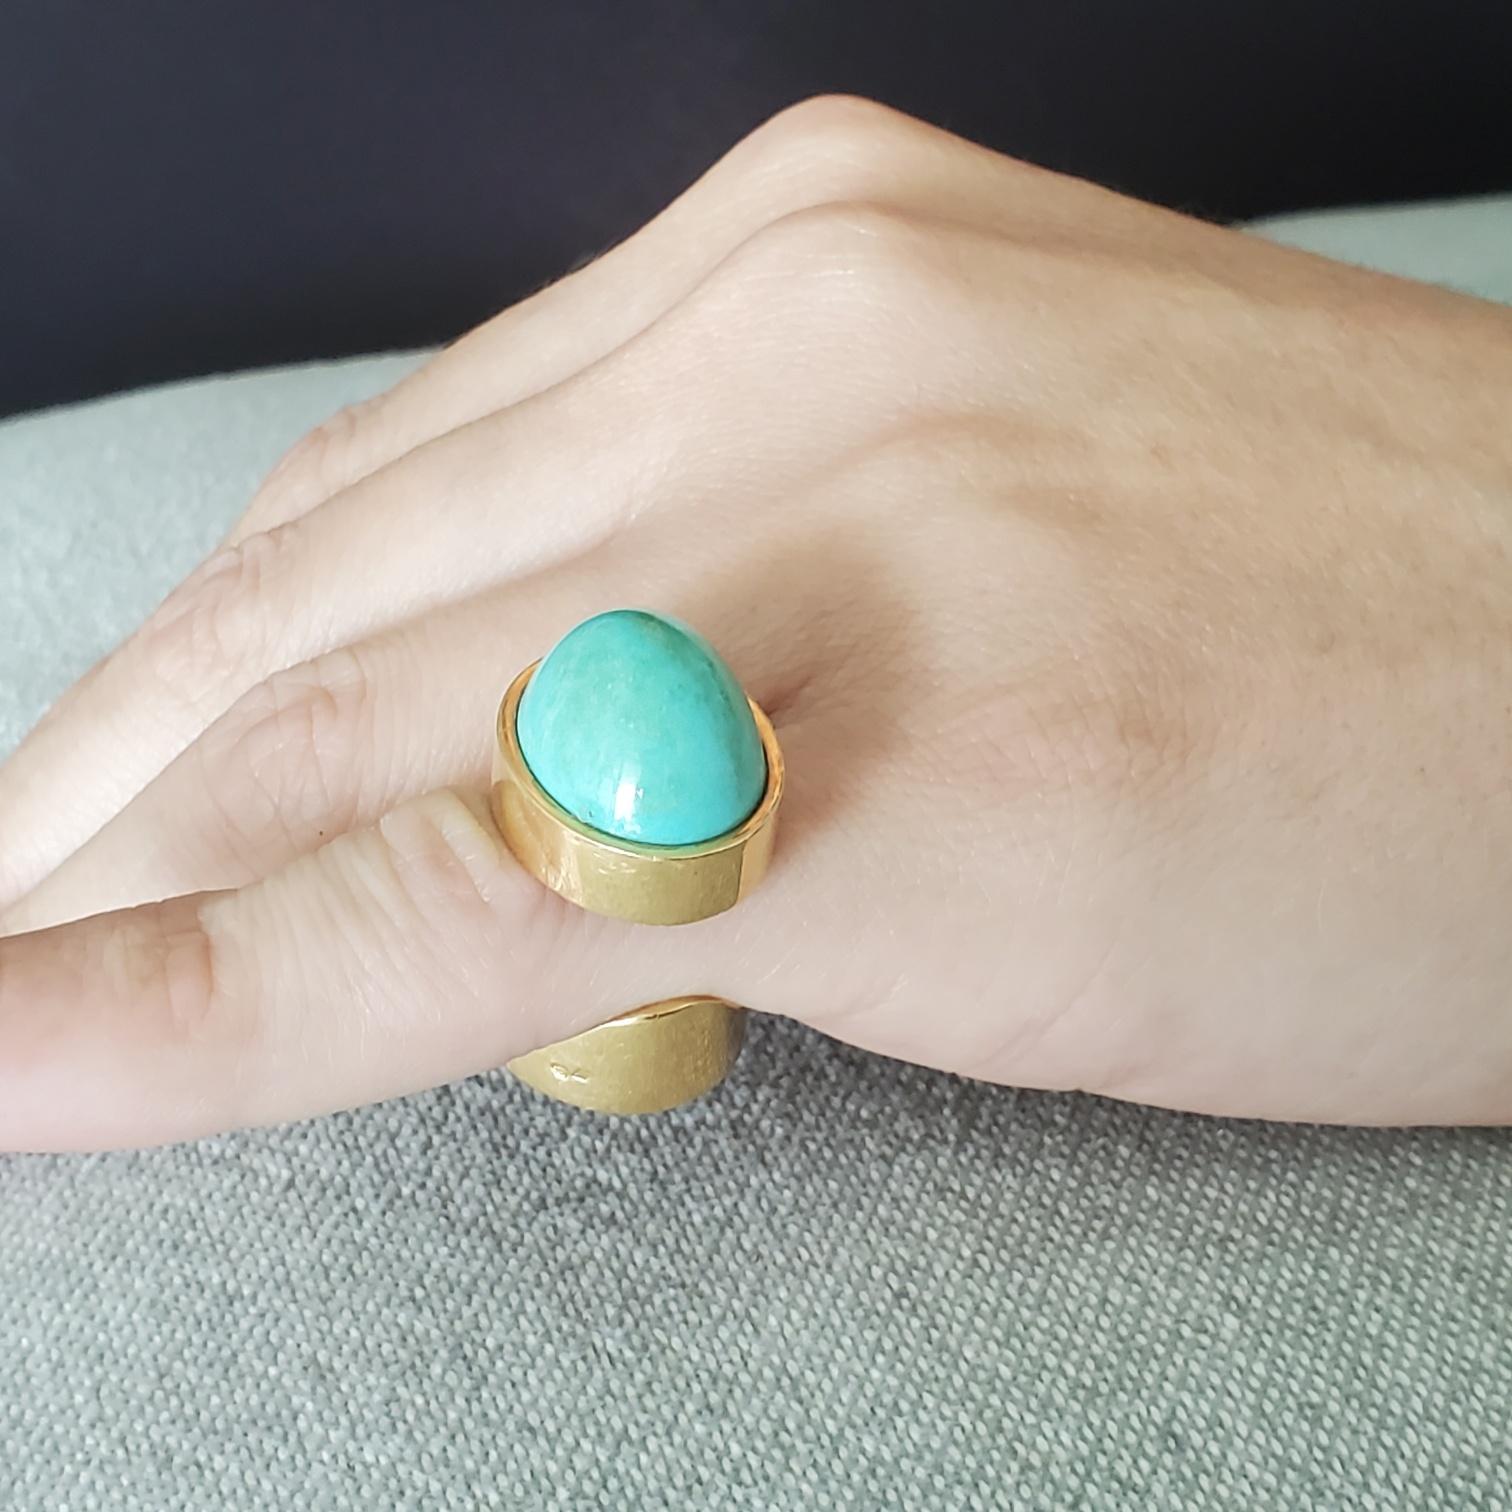 Dinh Van Paris For Pierre Cardin 1970 Geometric Ring 18Kt Yellow Gold Turquoise 3